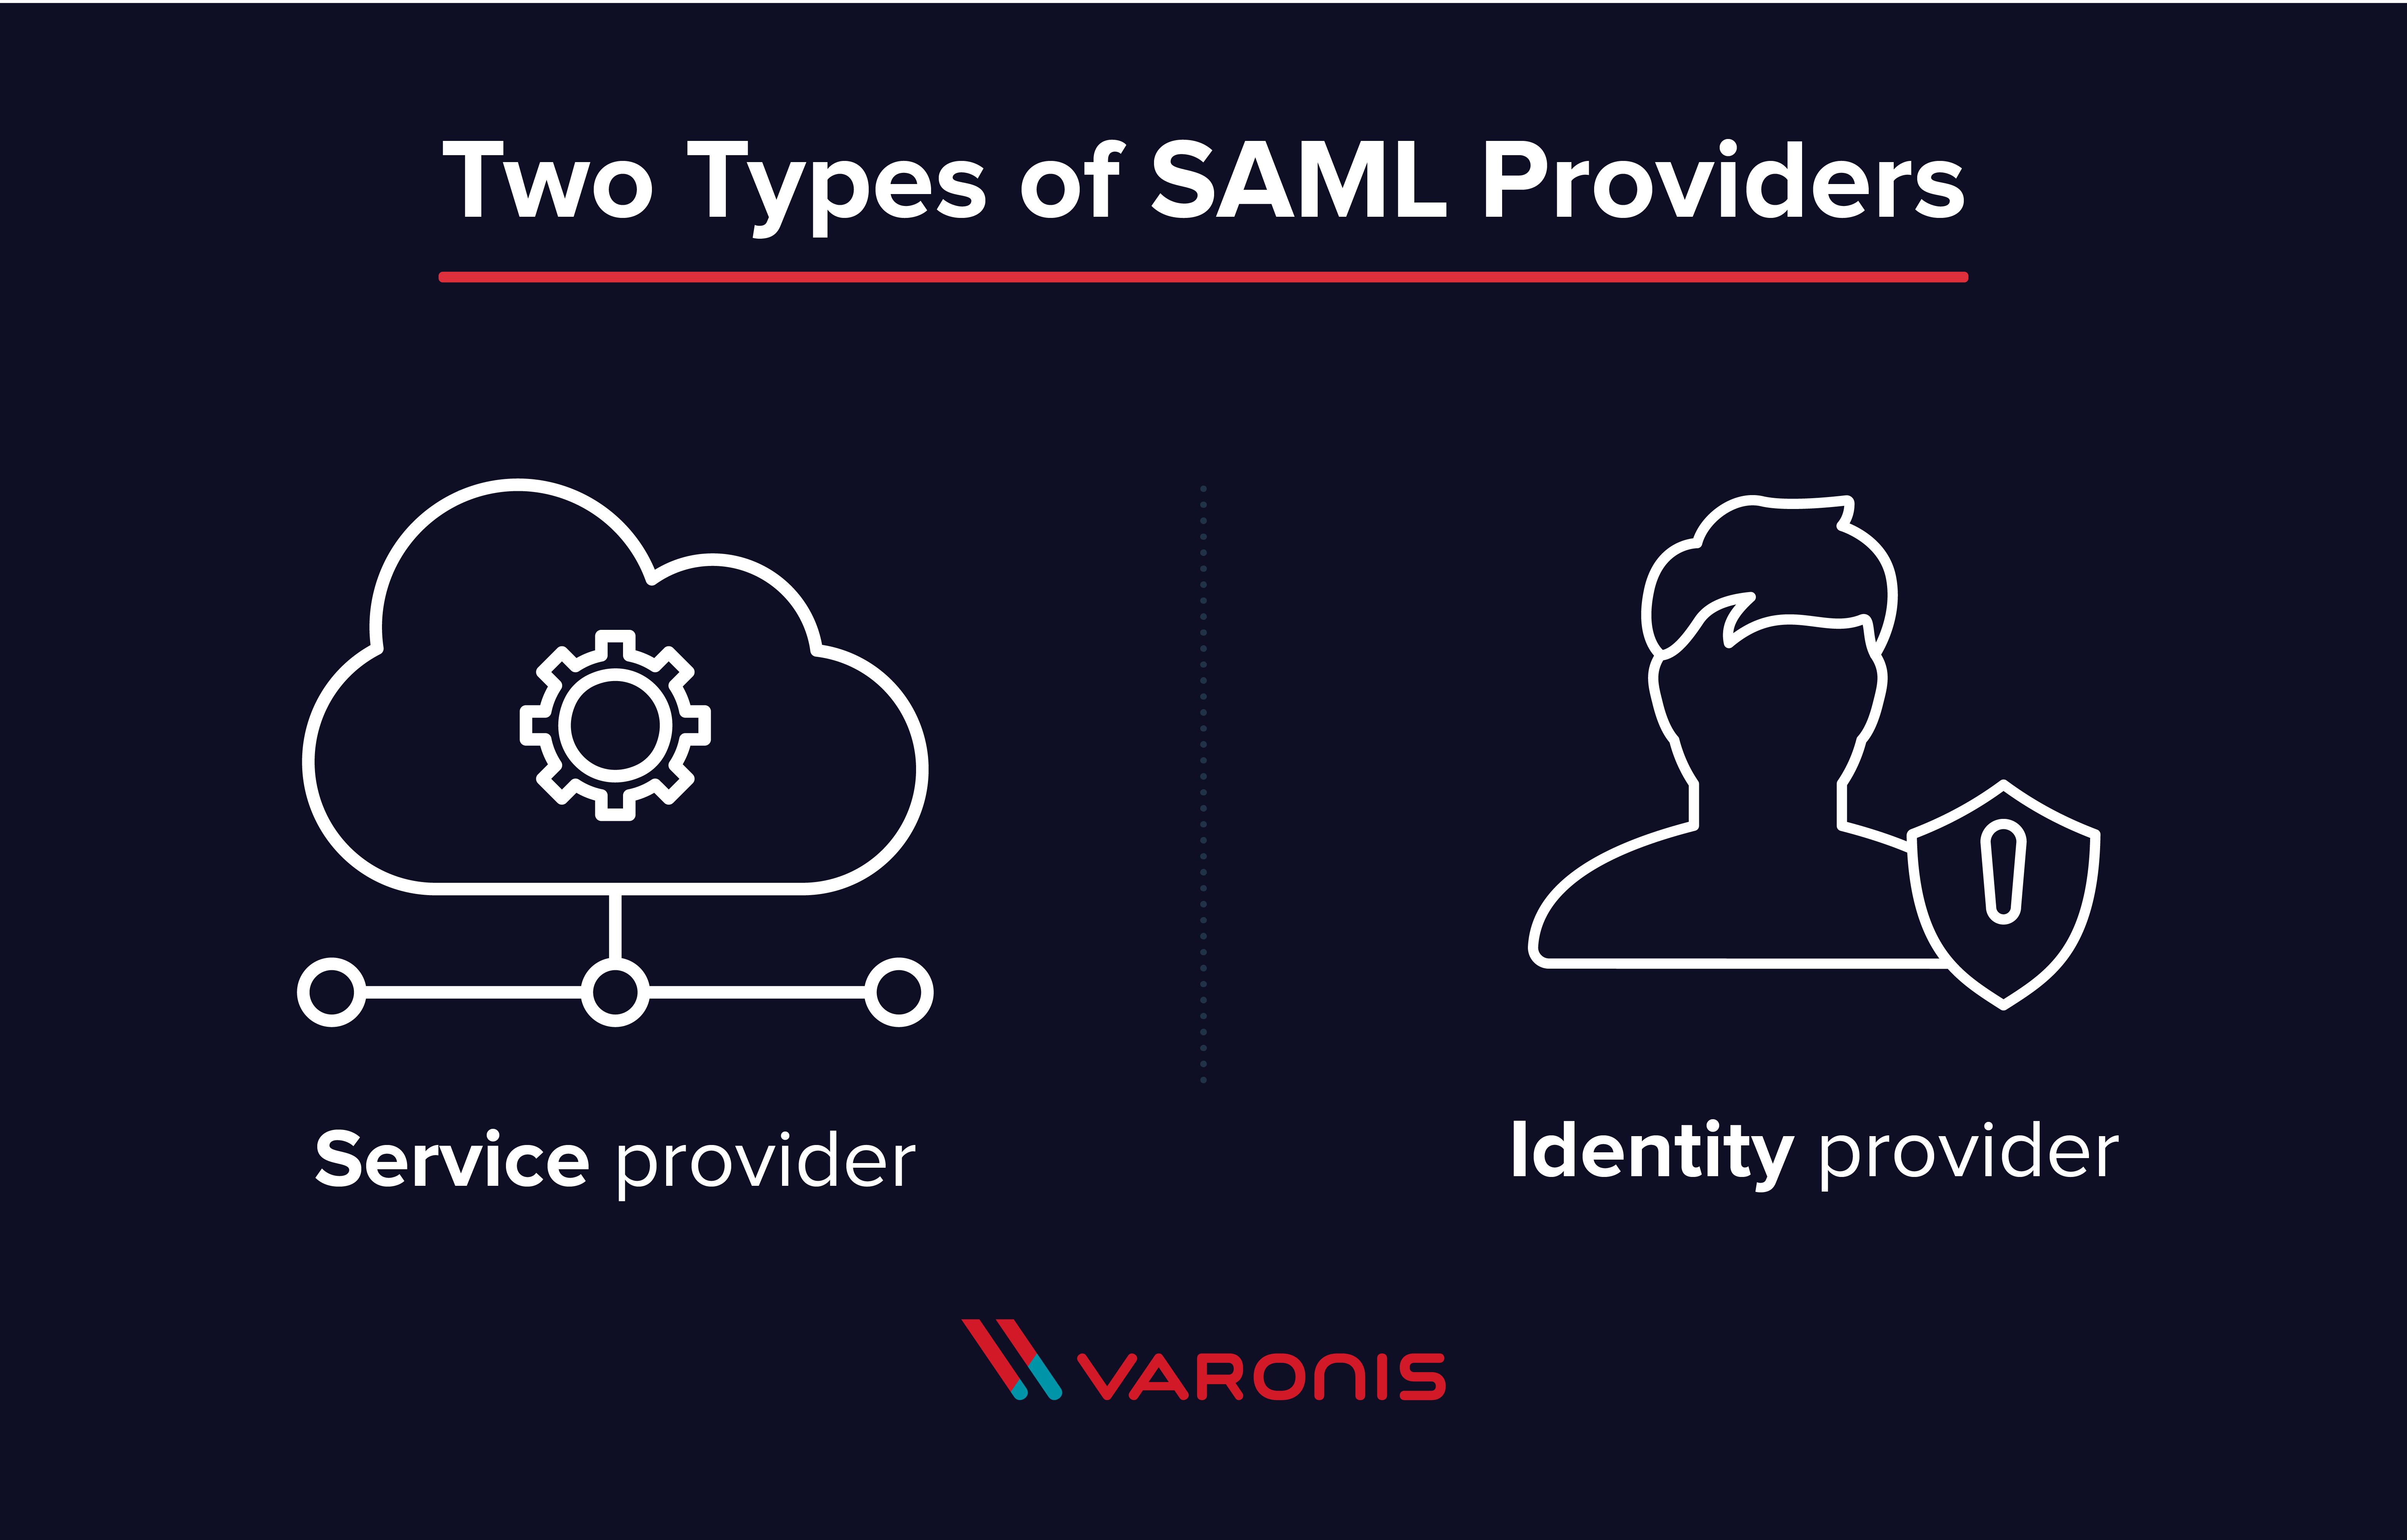 Two Types of SAML providers